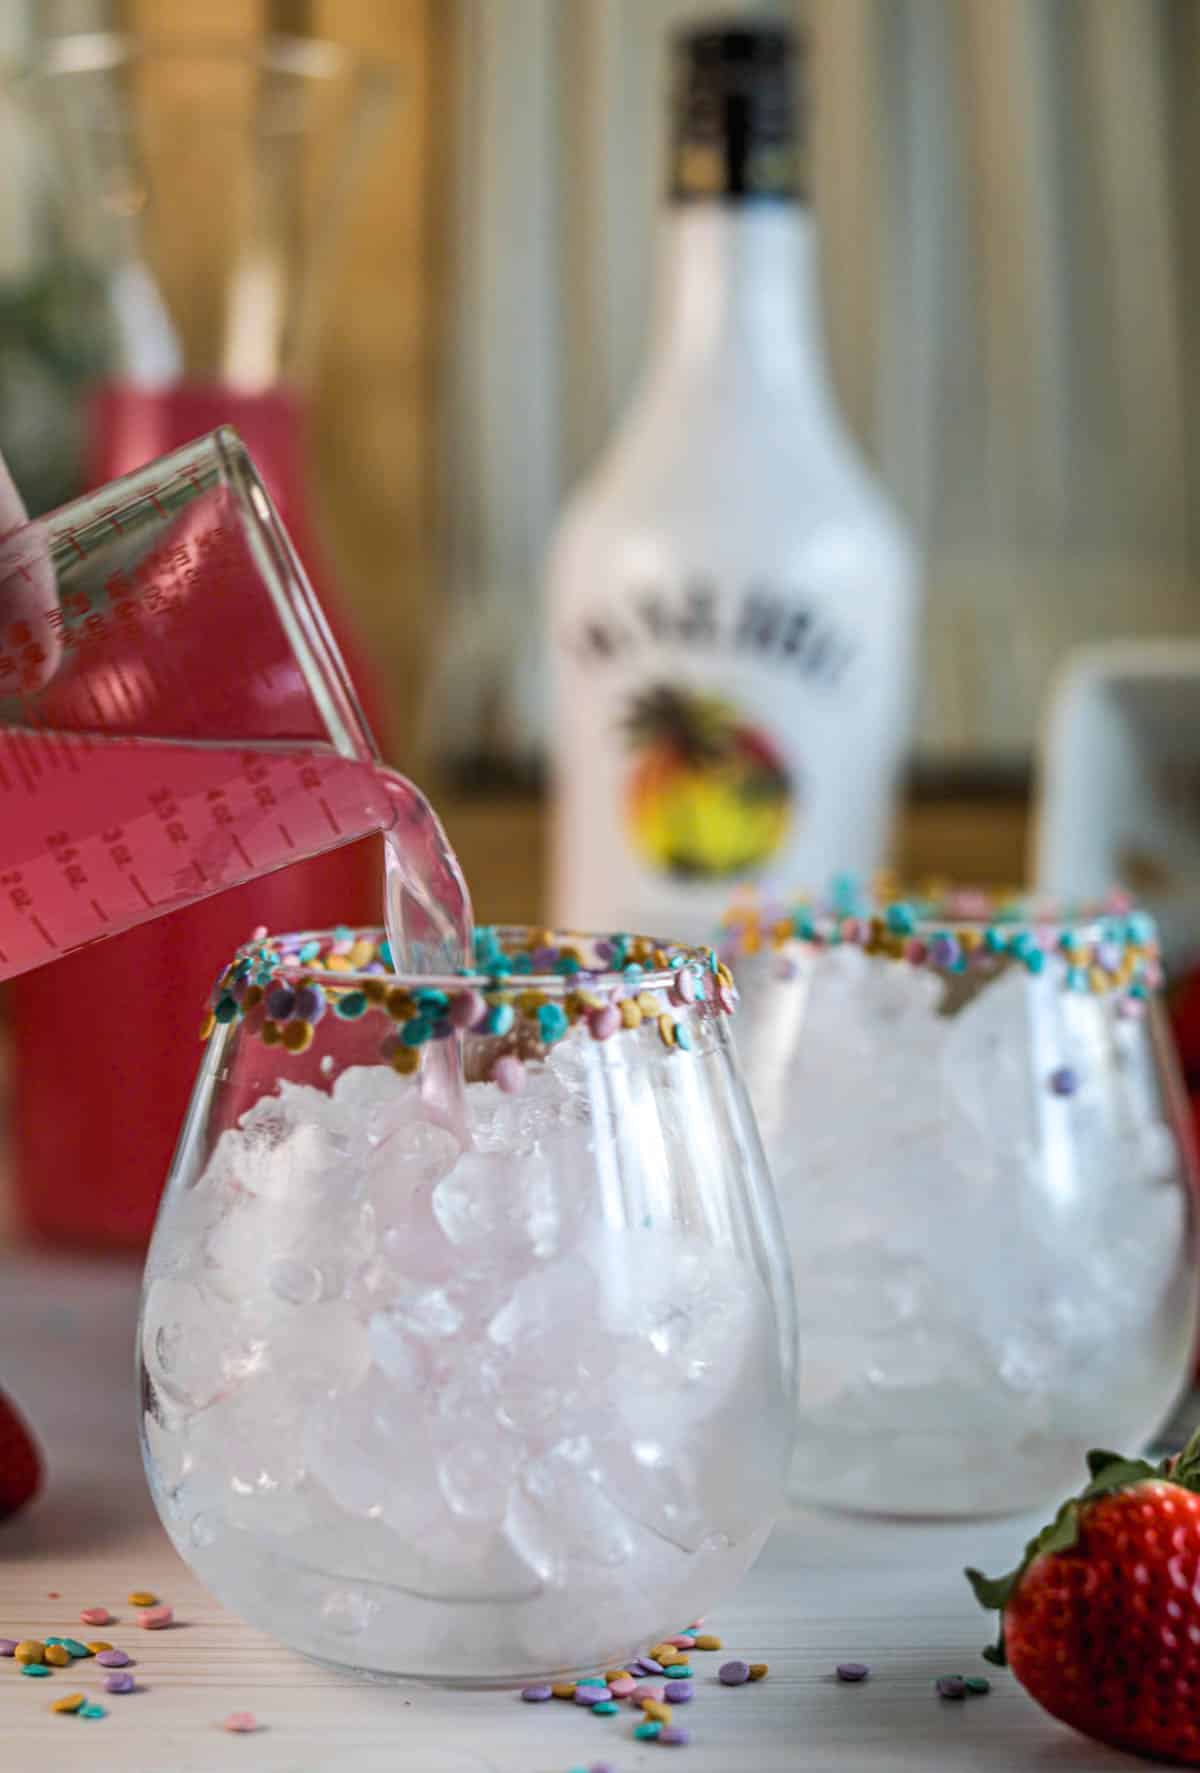 Pouring pink lemonade into glasses of ice with sprinkles on rim.